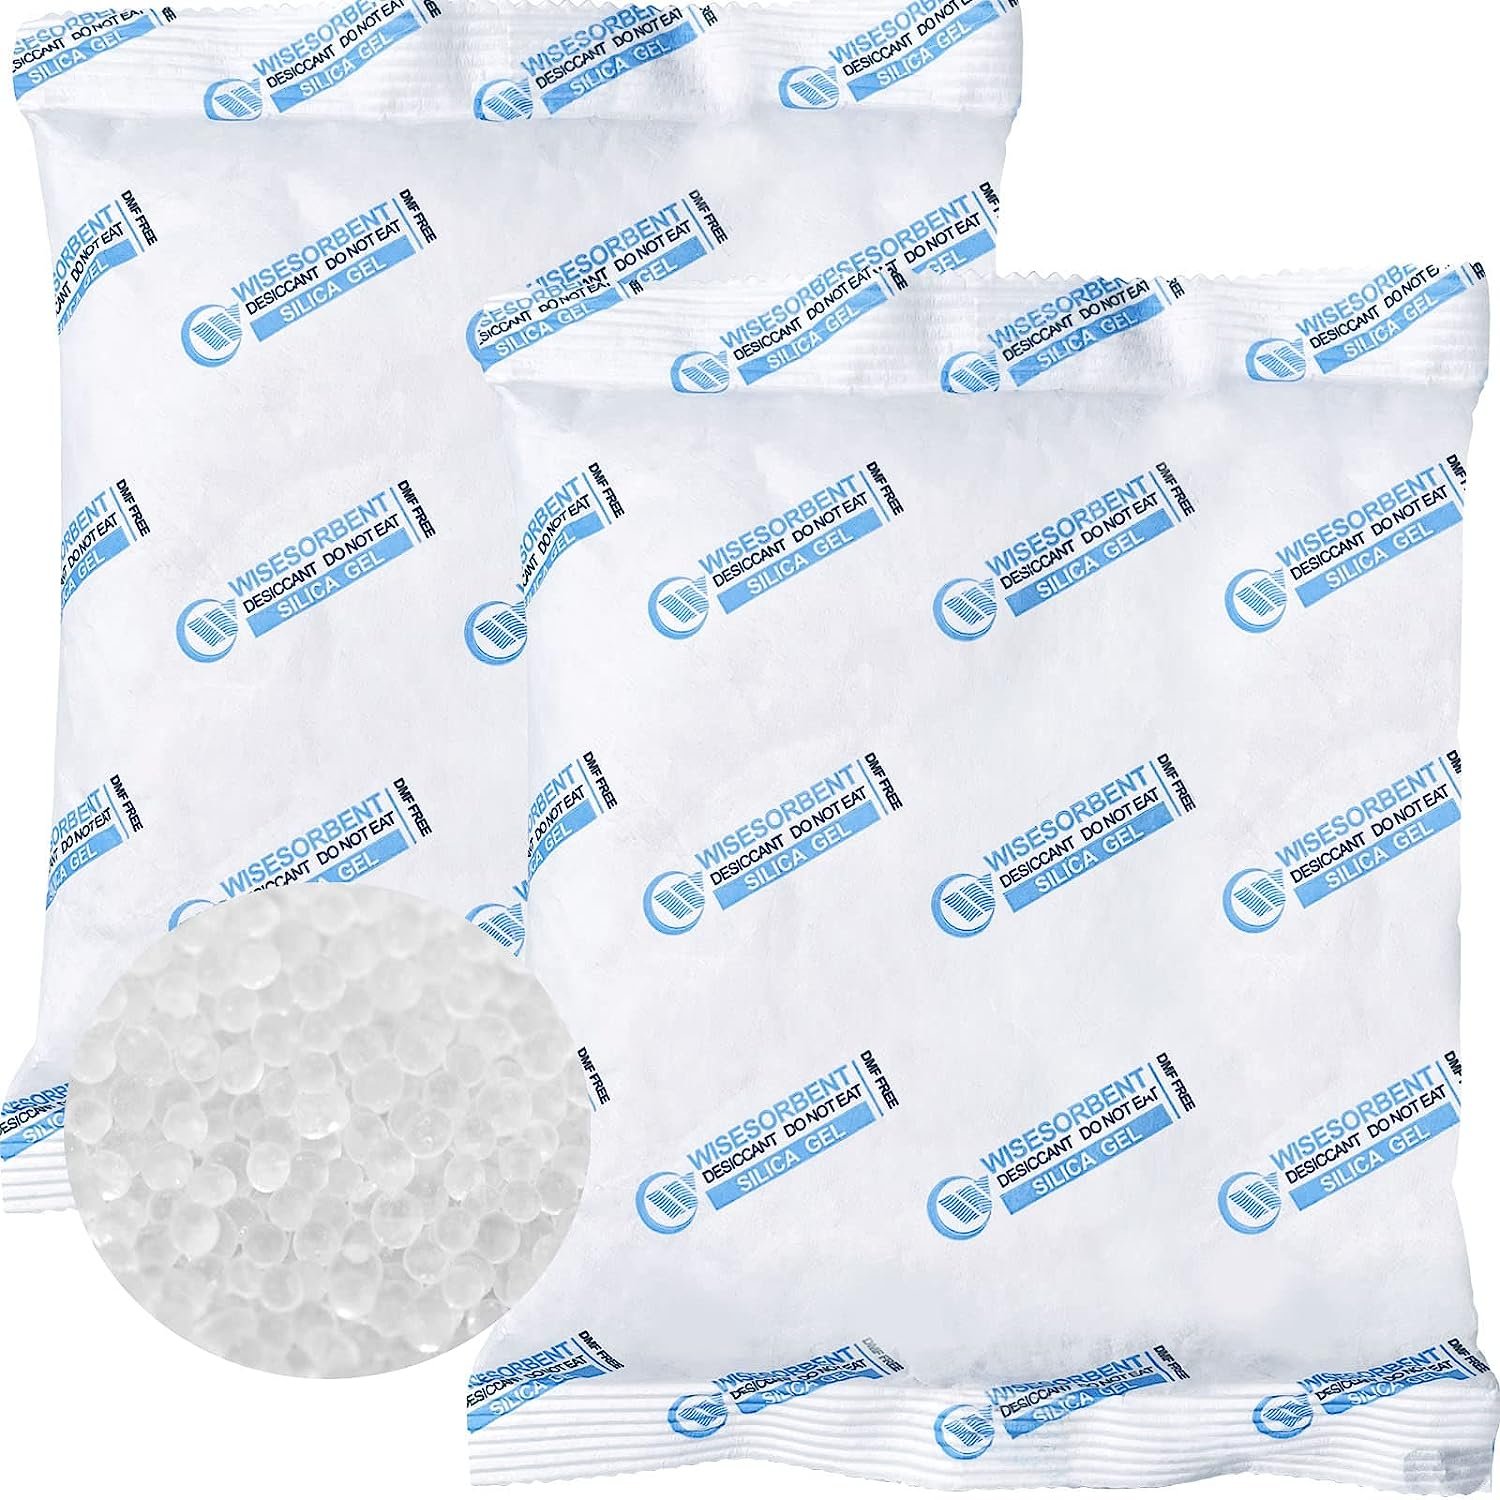 Uxcell Small Trash Bags 0.5 Gallon Garbage Bags White, 8 Rolls / 240 Counts